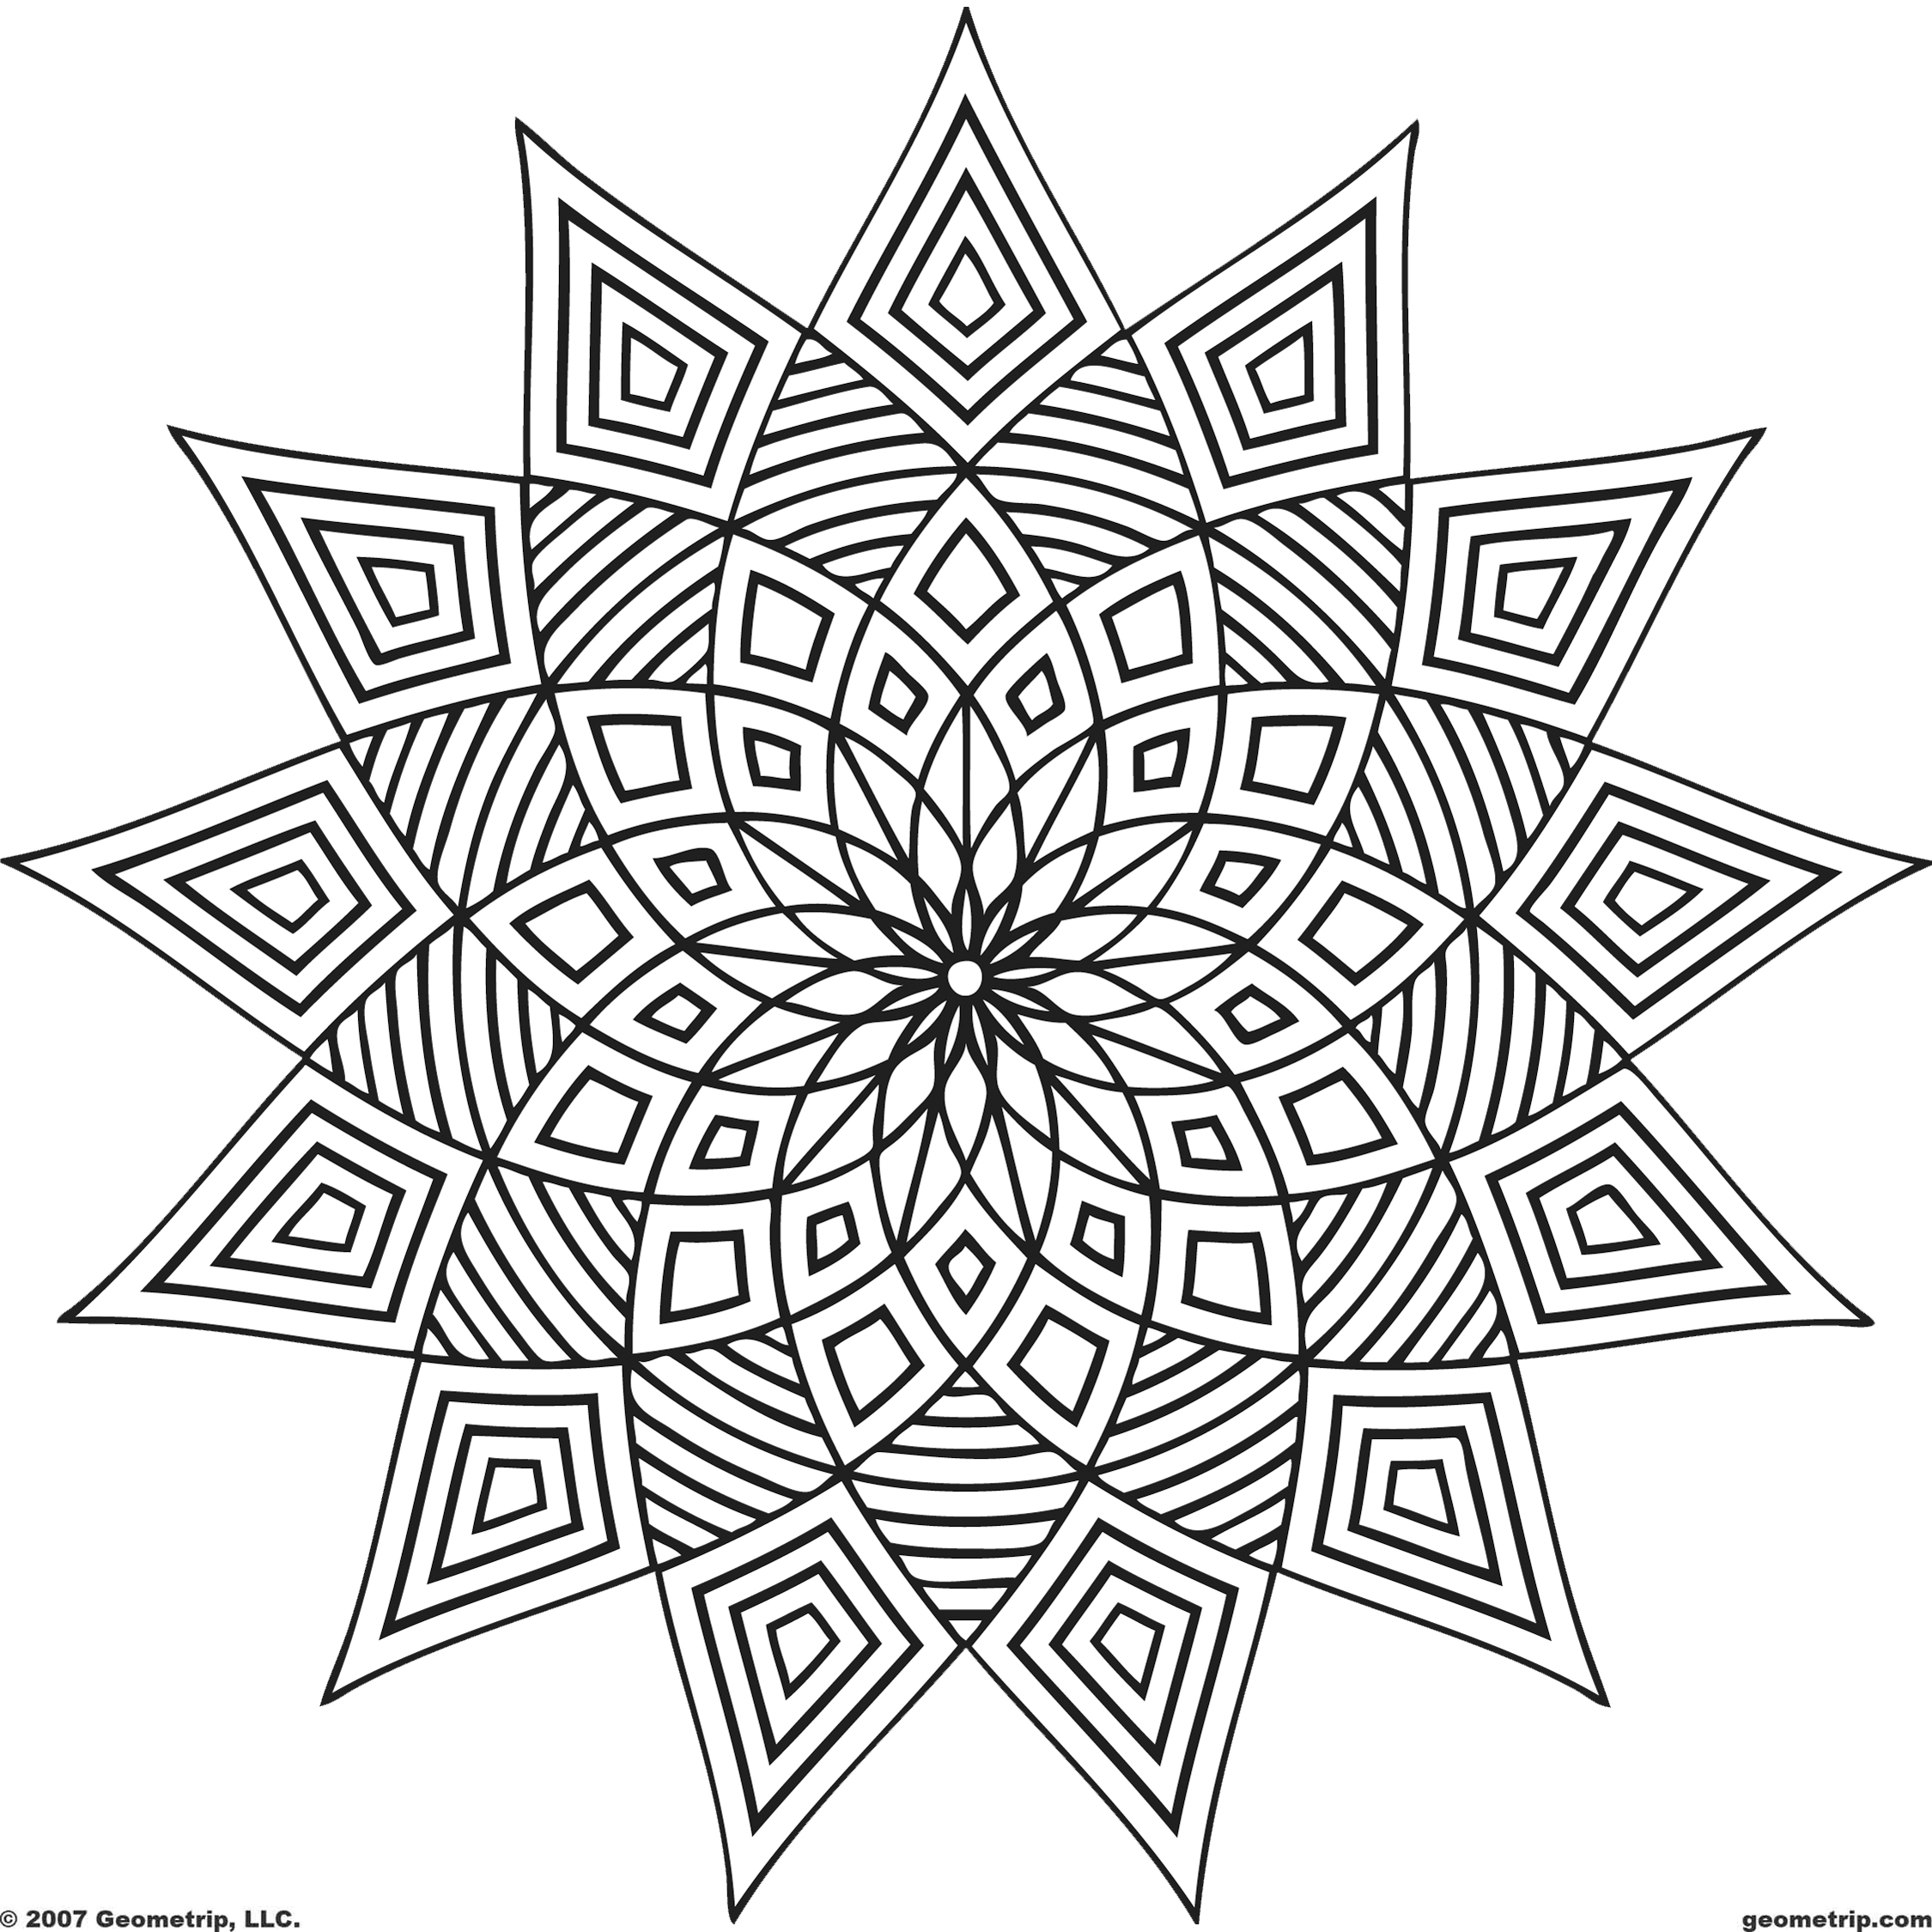 16 Coloring Book Geometric Pattern Vector Images